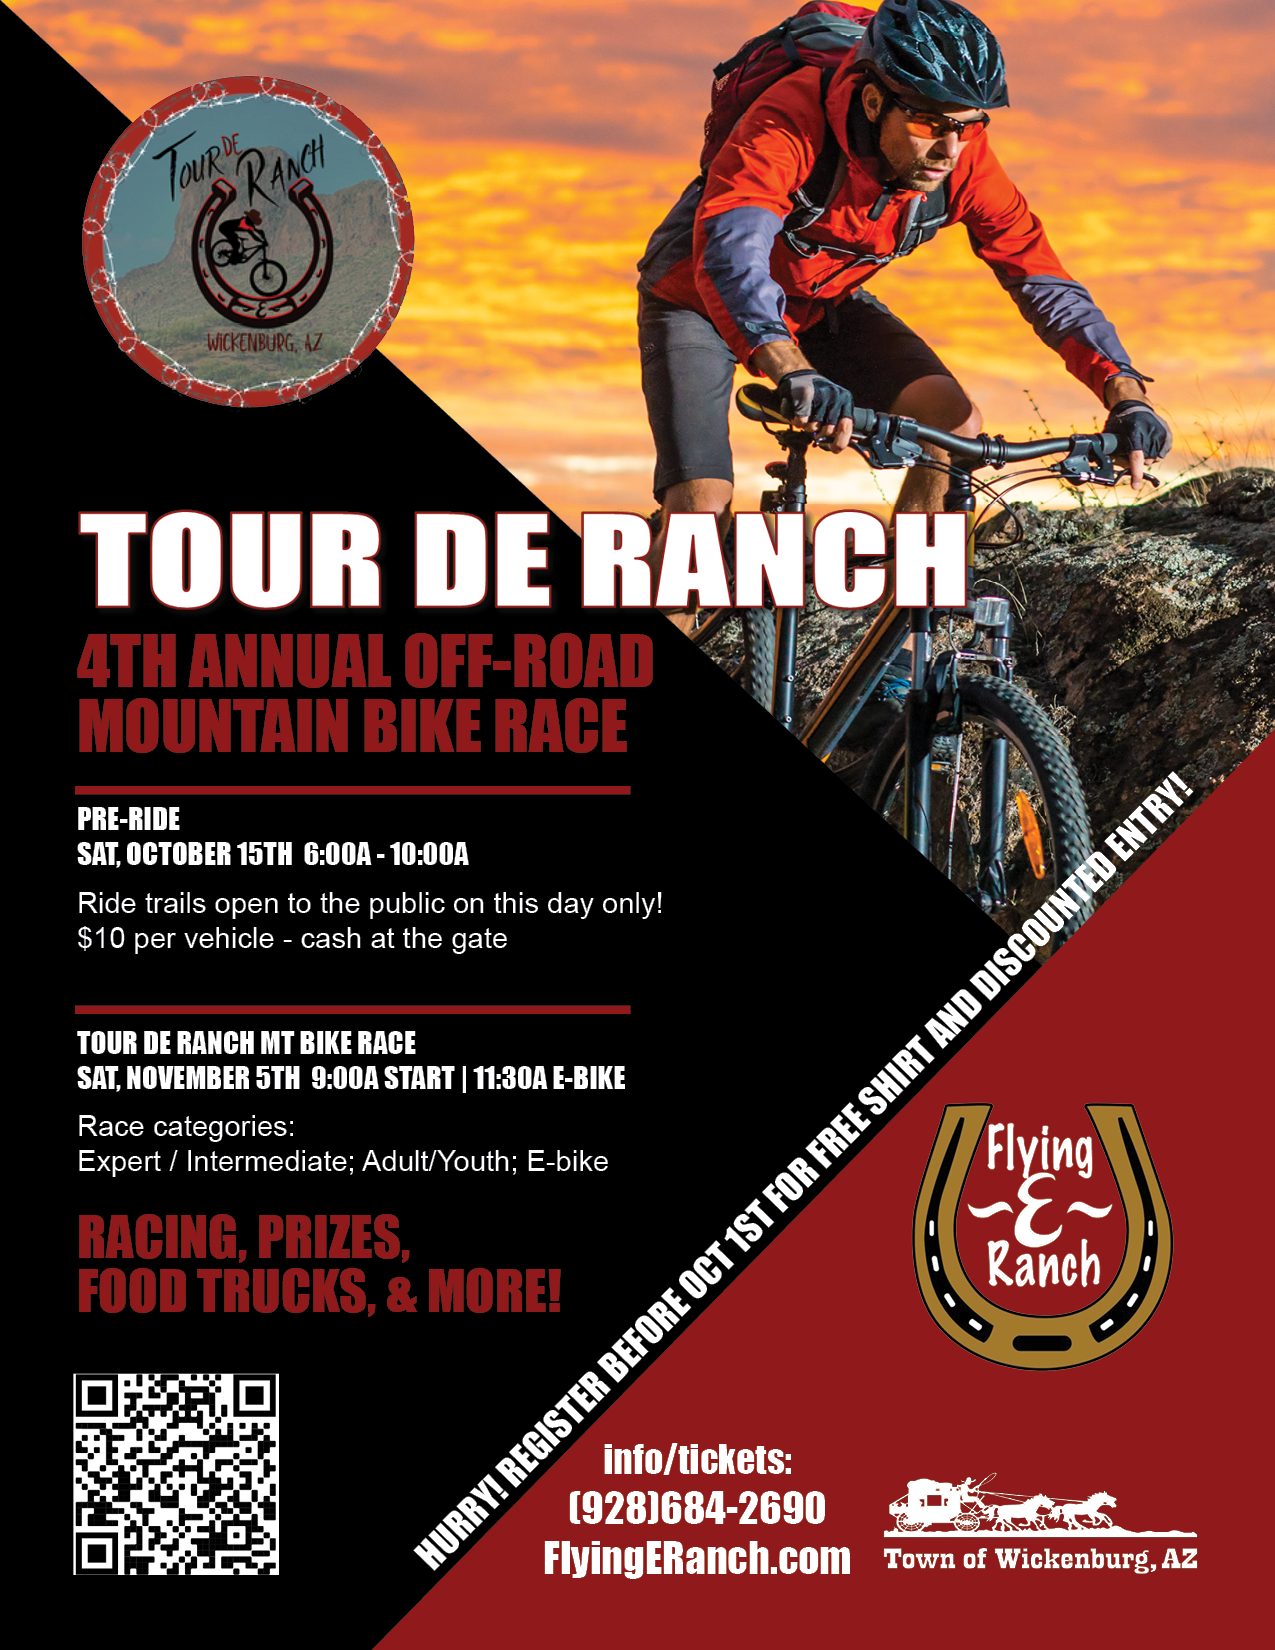 4th Annual Tour de Ranch at Flying E Ranch Out Wickenburg Way